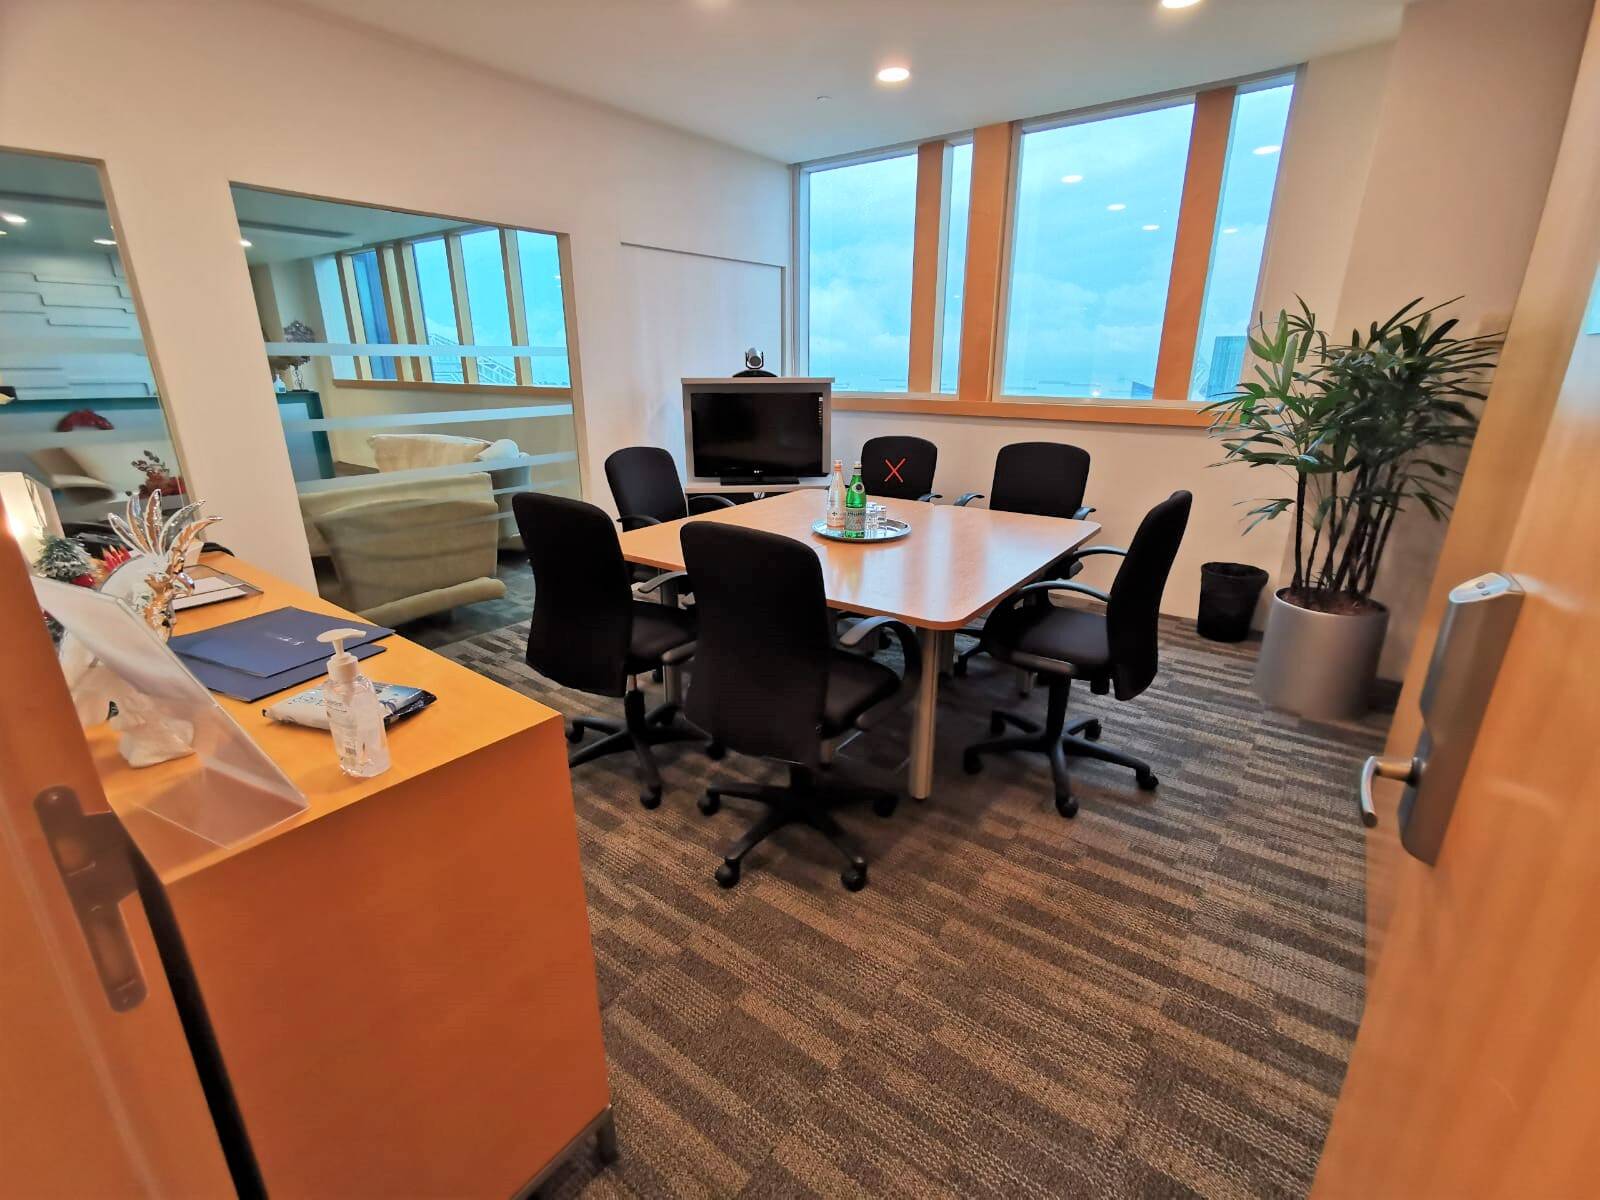 Signature Meeting Room for 6 pax